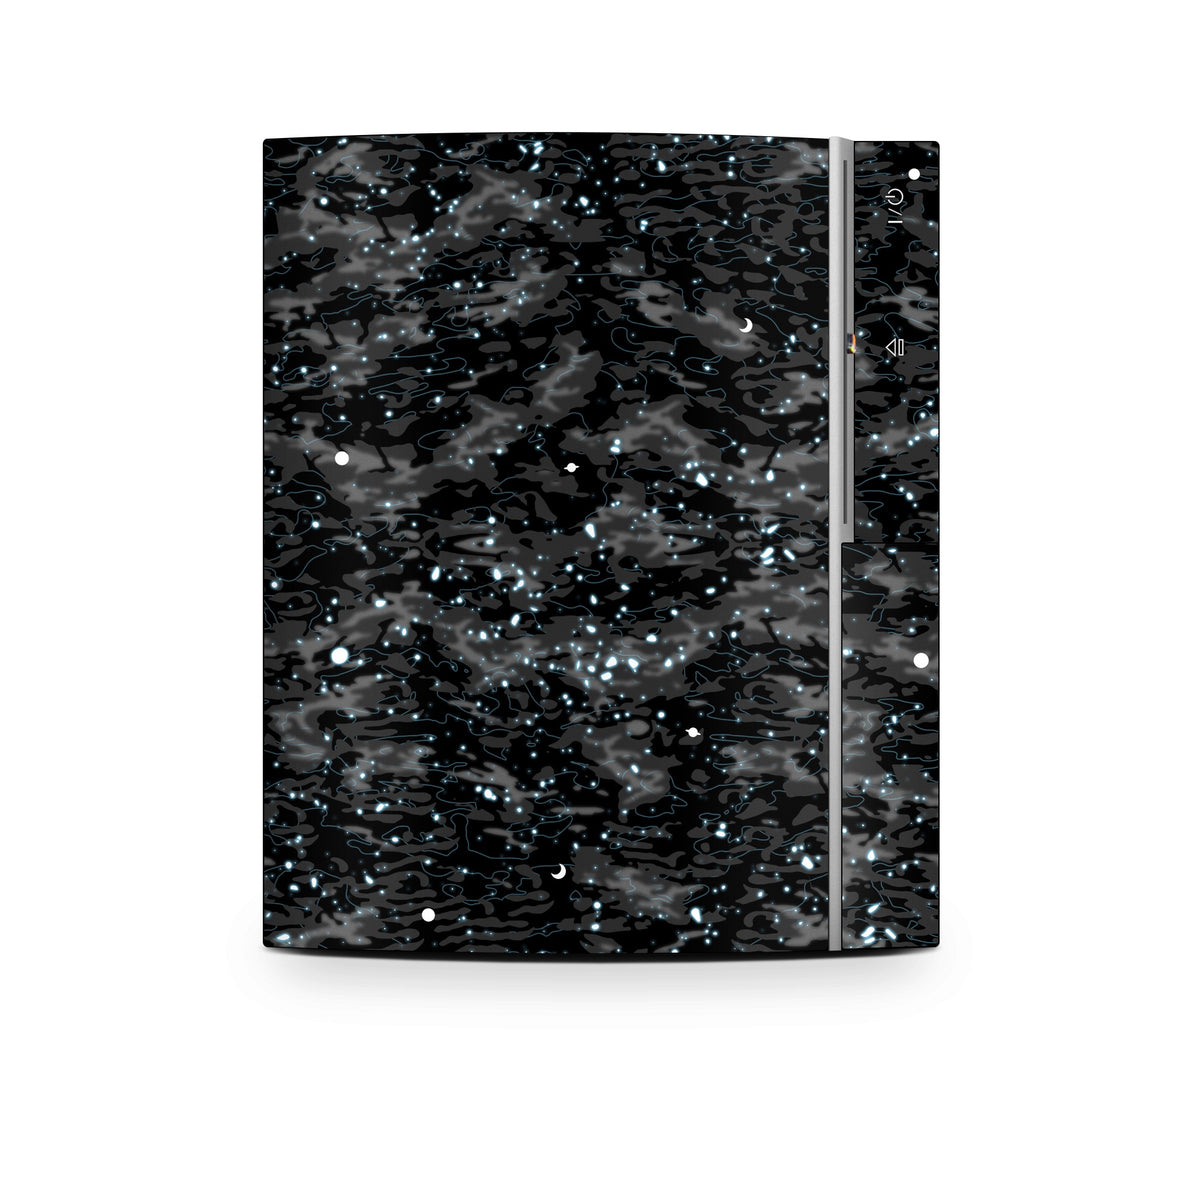 Gimme Space - Sony PS3 Skin